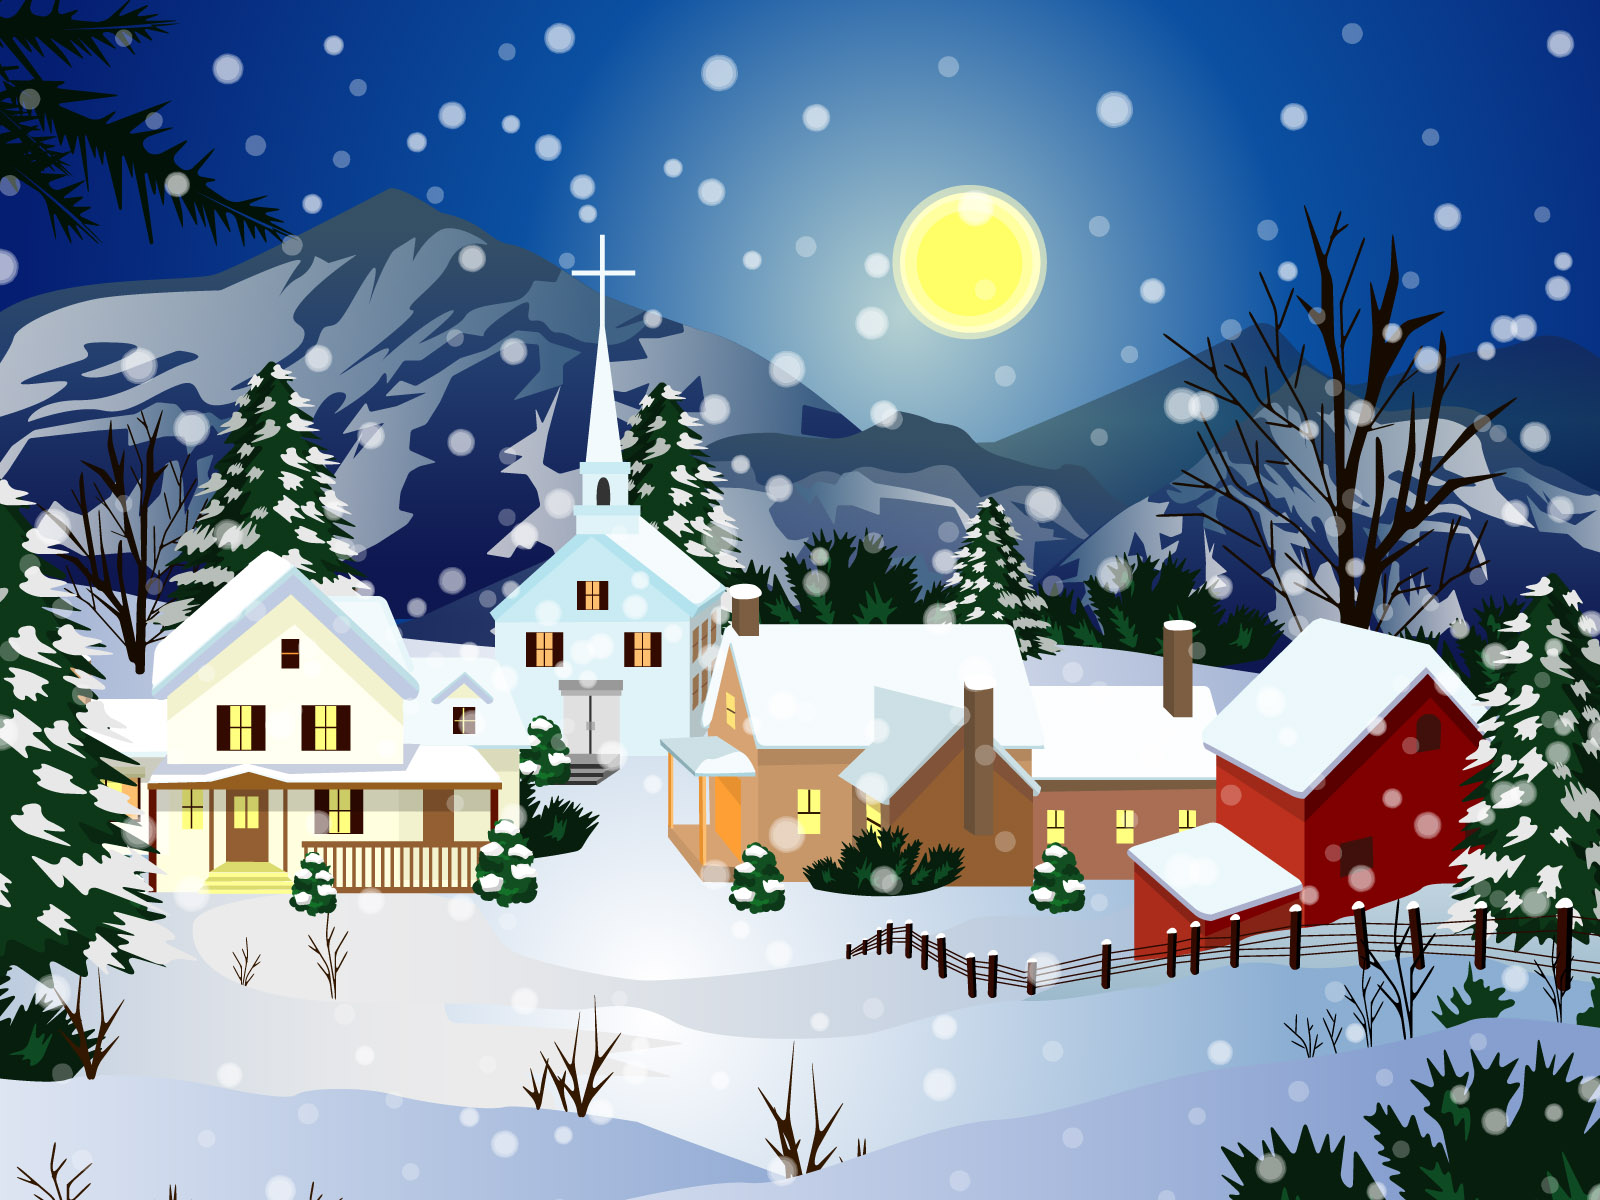  Christmas PowerPoint Backgrounds Download PowerPoint Tips 1600x1200